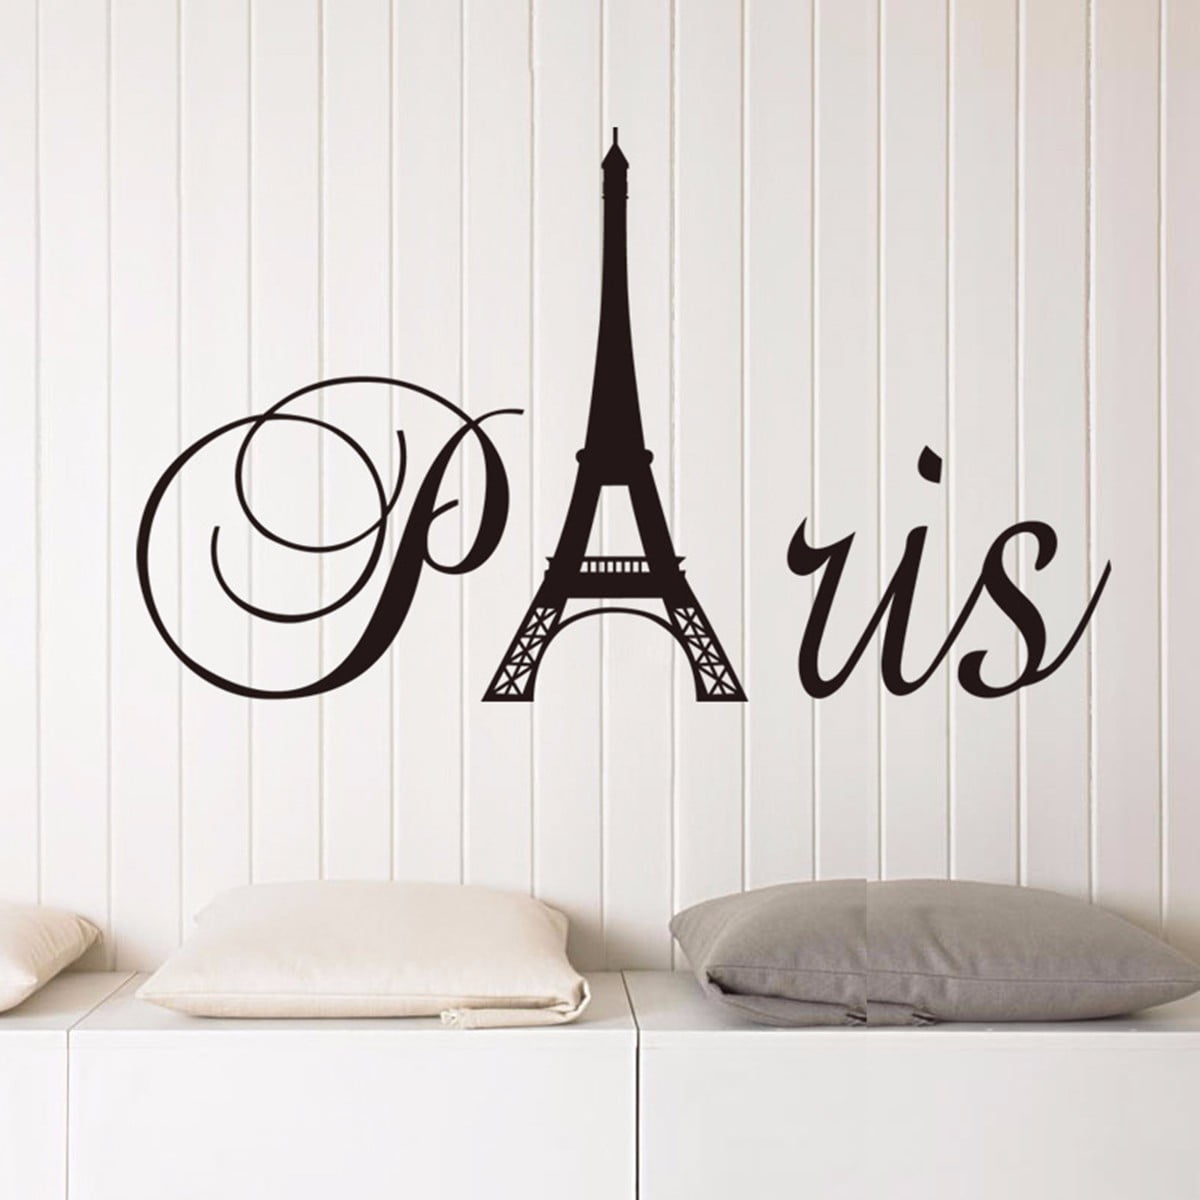 Paris Eiffel Tower Removable Art Decal Mural Home Bedroom Wall Sticker Decor New 